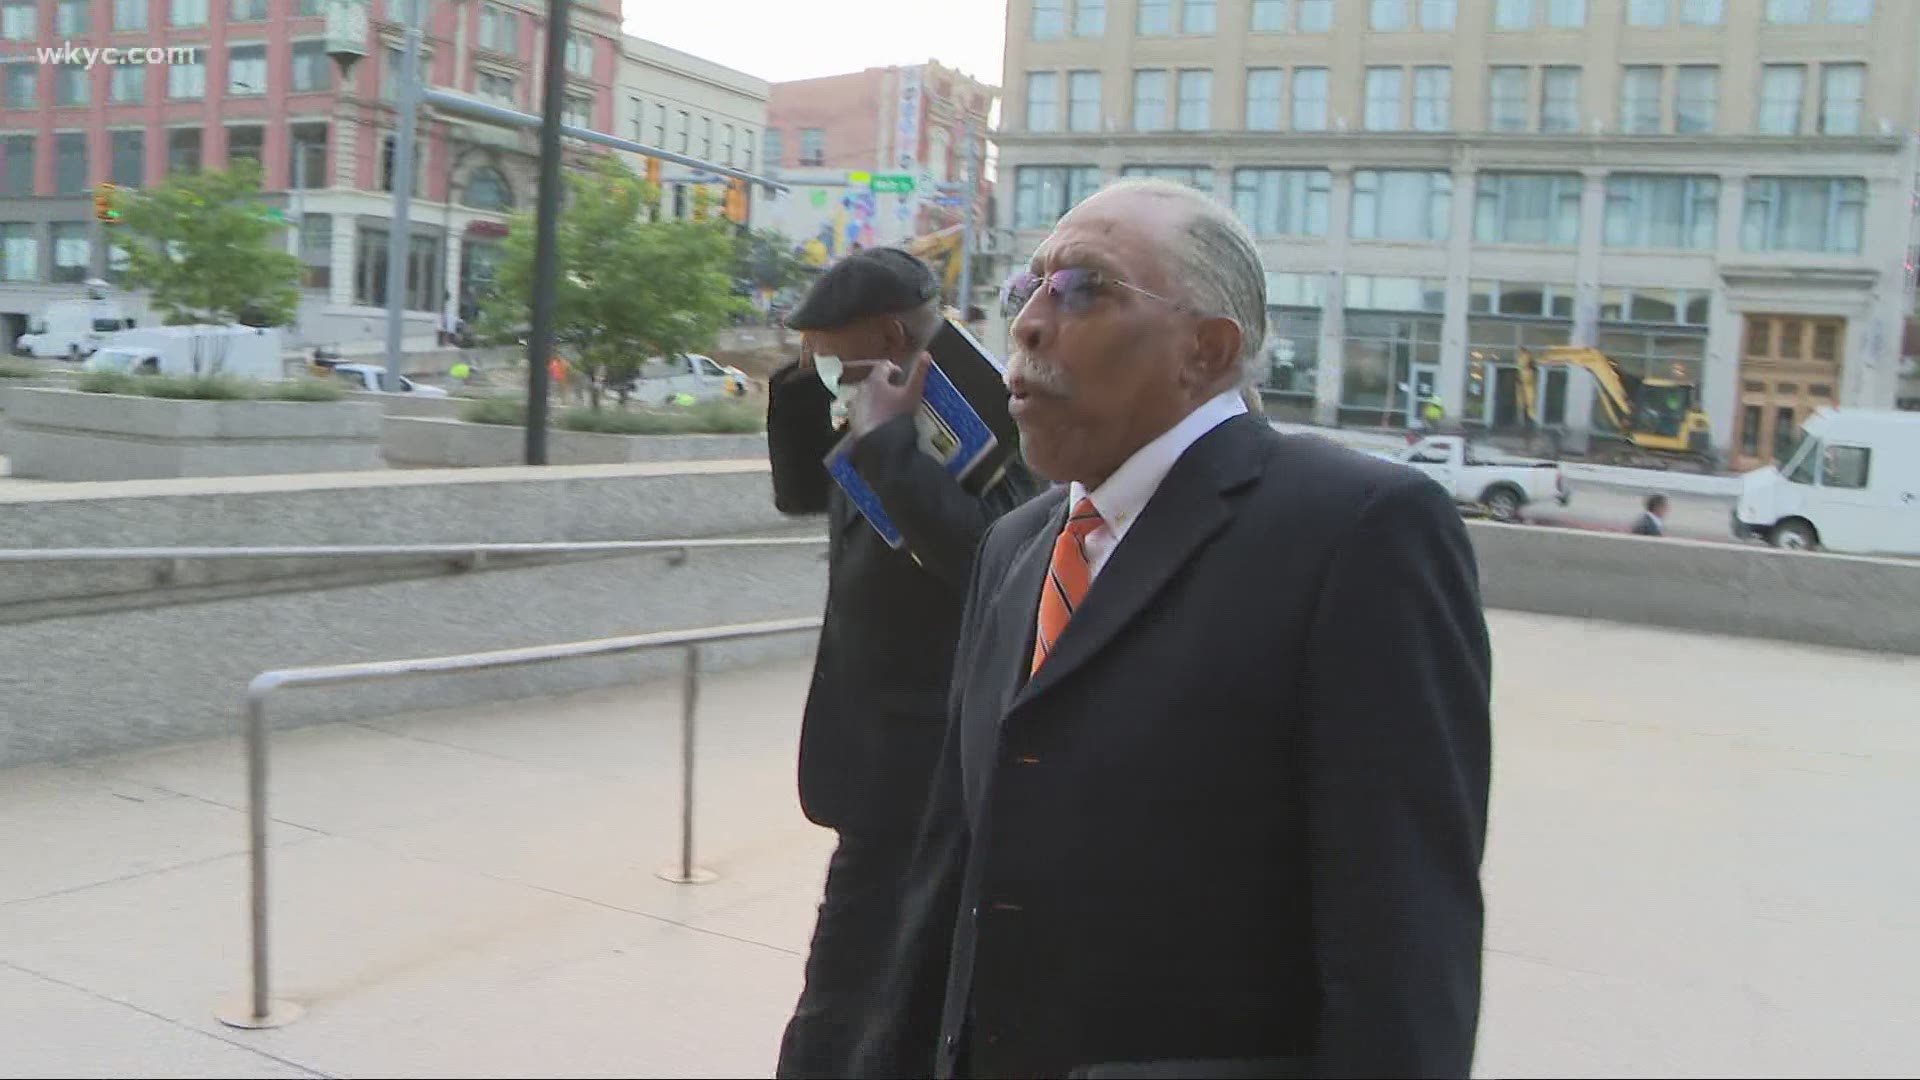 Ken Johnson's corruption trial will begin next week. The 75-year-old is accused of stealing more than $125,000 in taxpayer money.